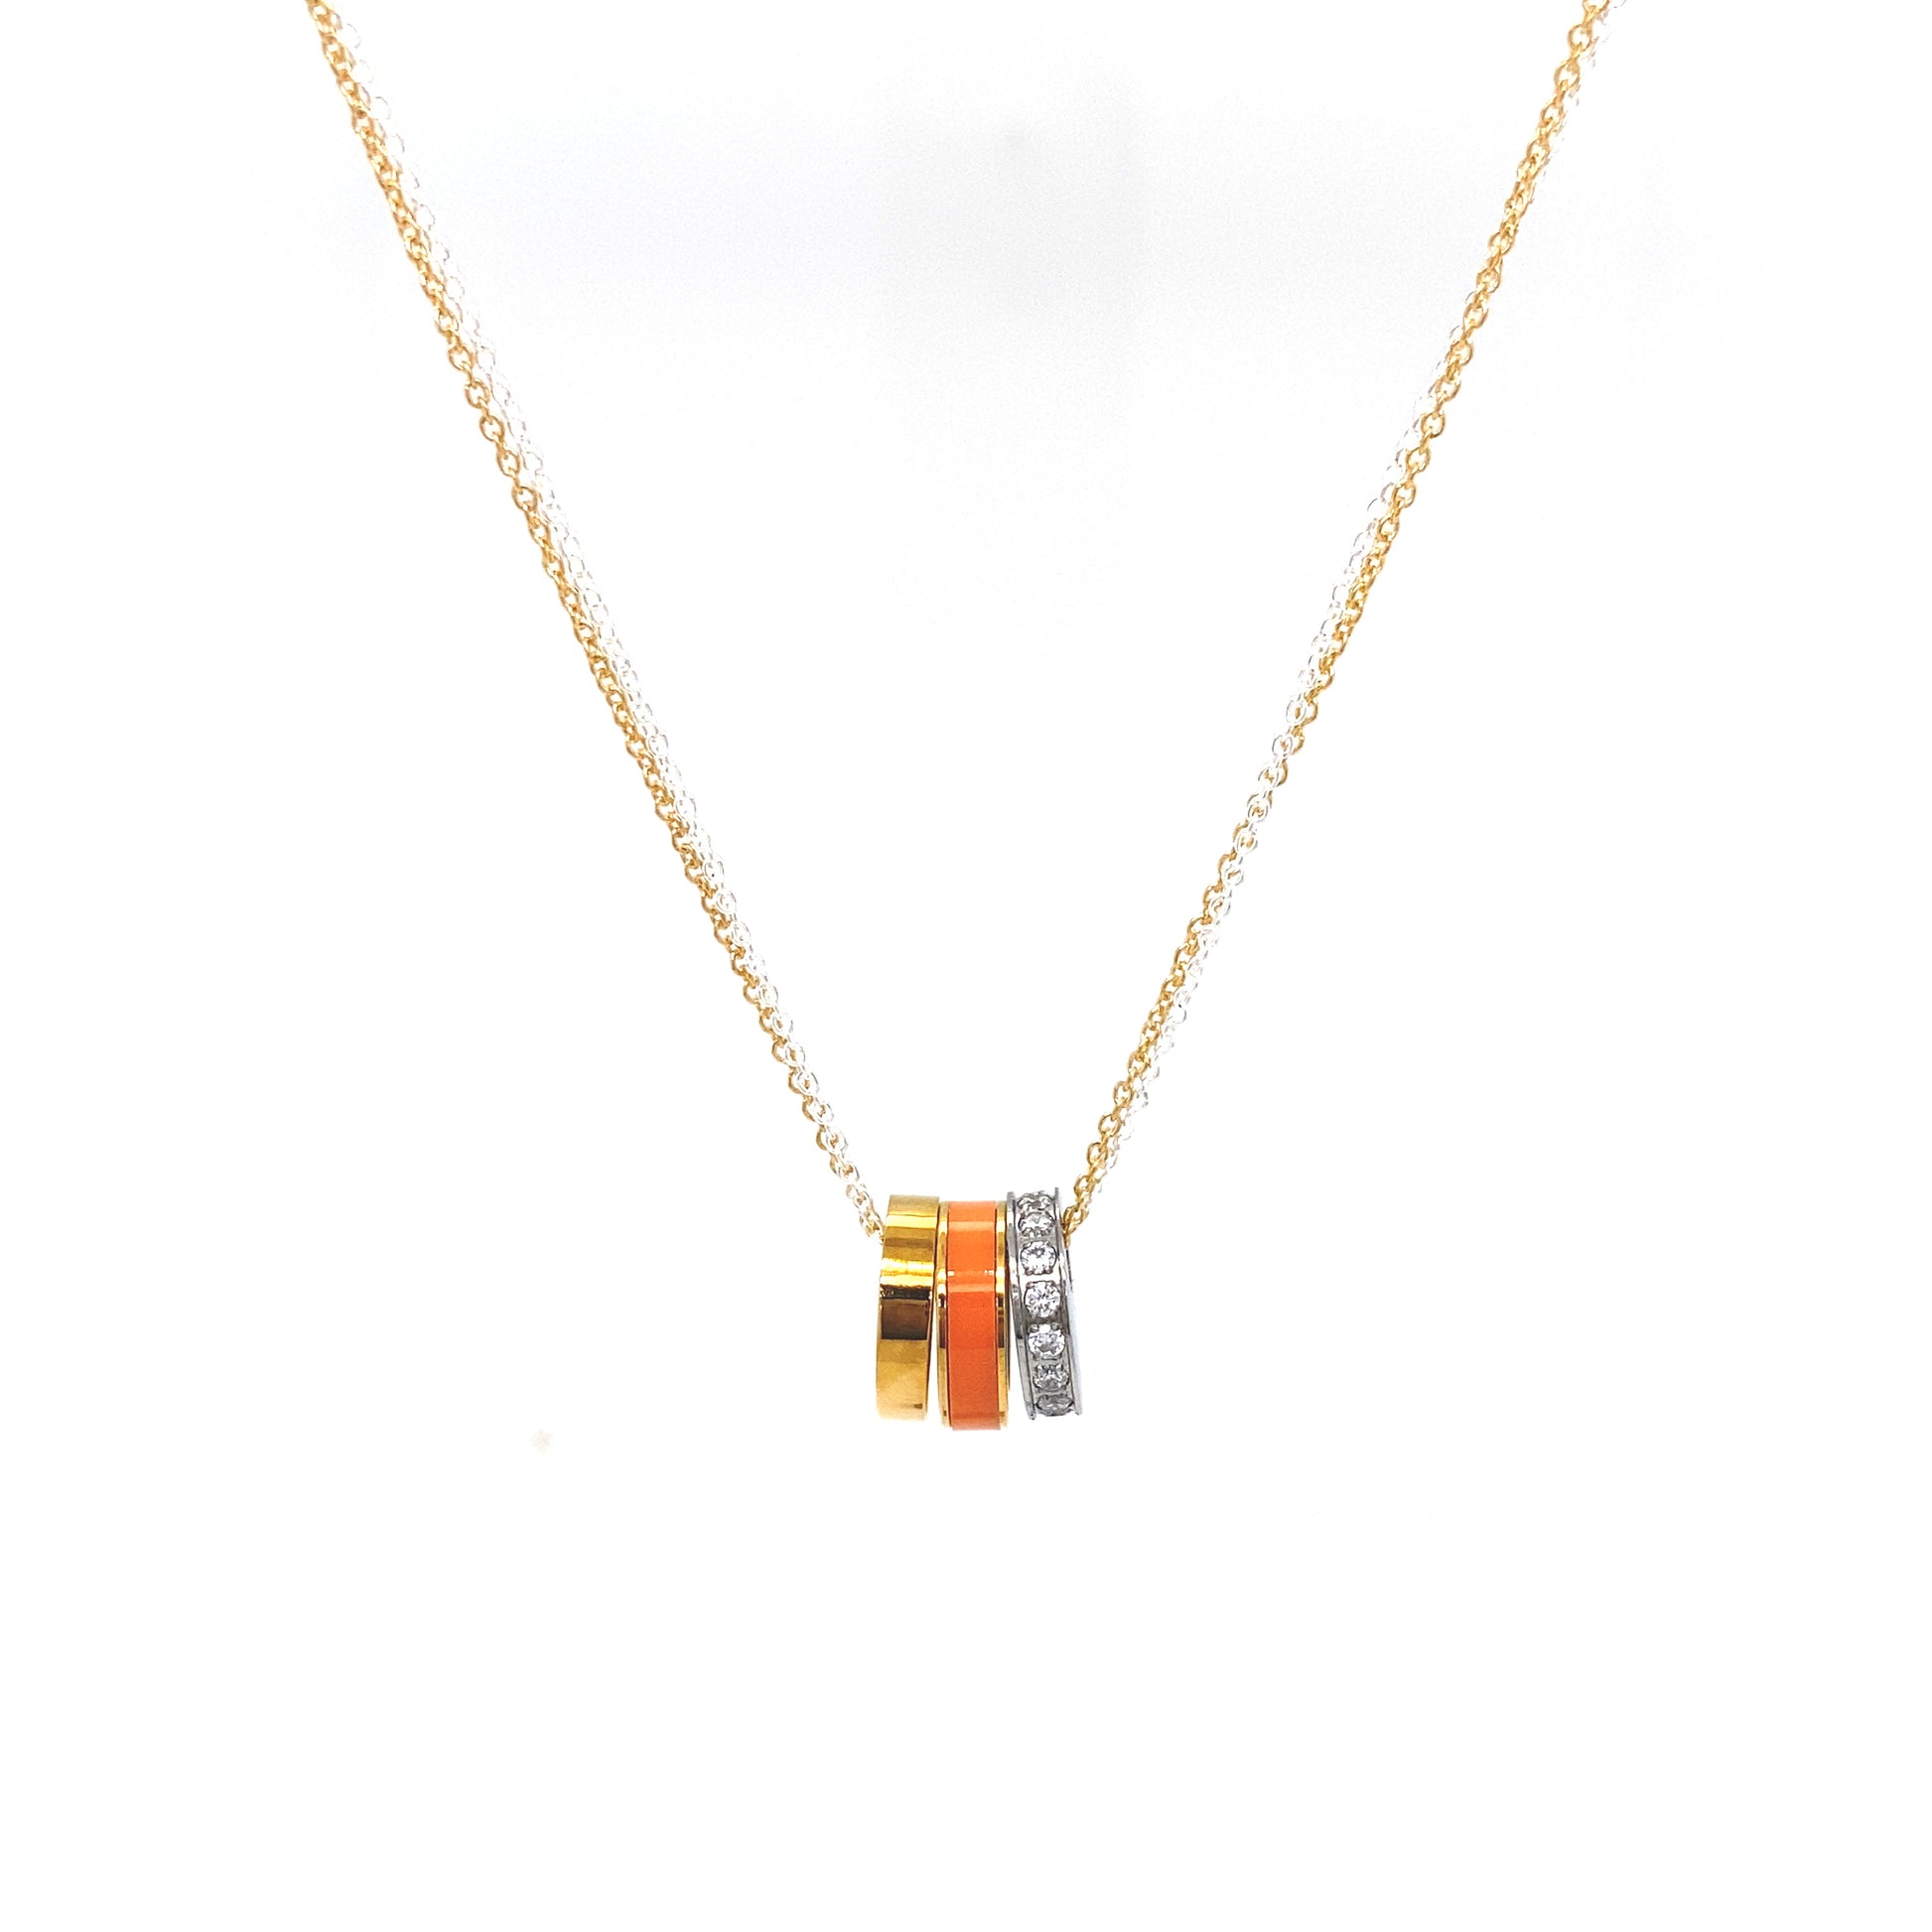 WEWA DOUBLE CHAIN 3 CHIPS ORANGE NECKLACE 